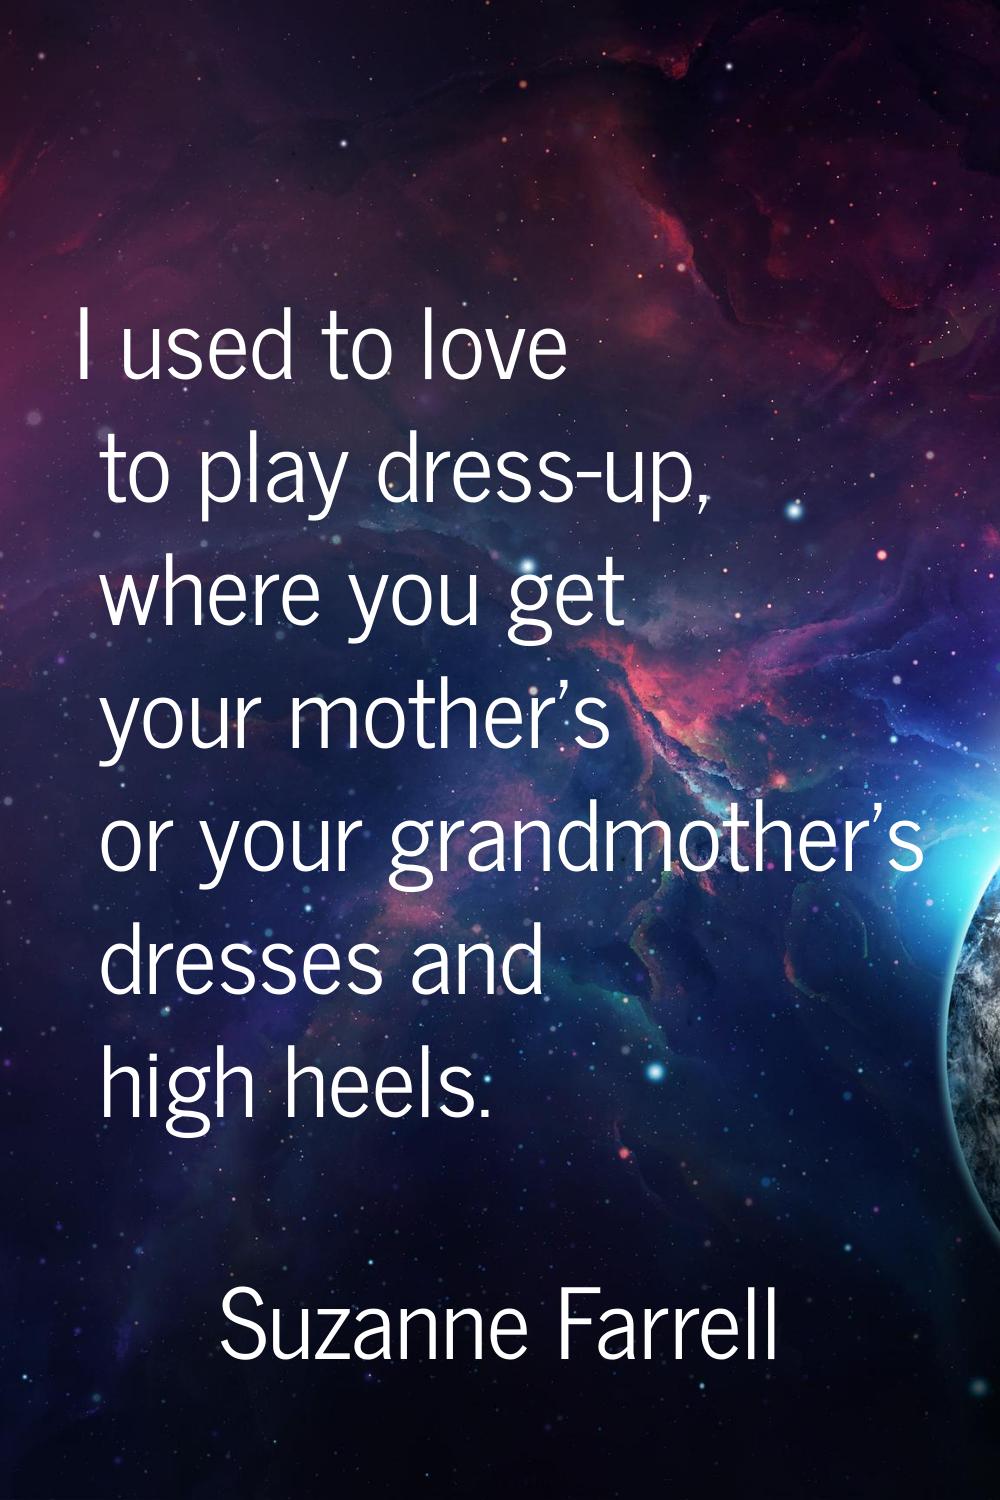 I used to love to play dress-up, where you get your mother's or your grandmother's dresses and high